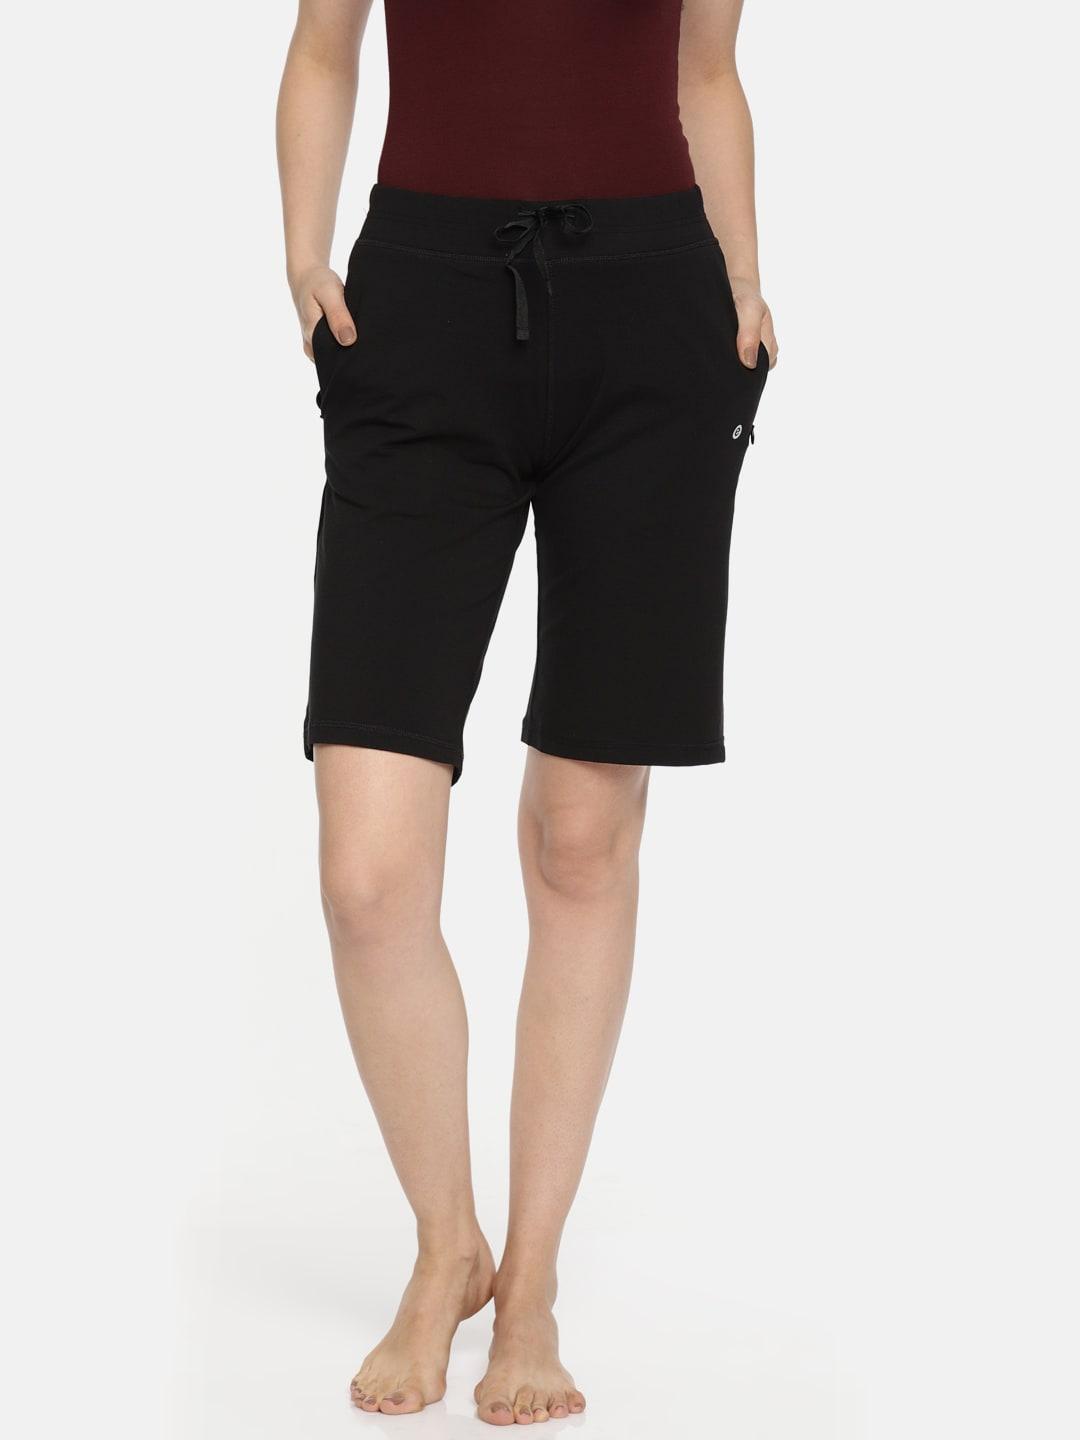 enamor-women-black-relaxed-fit-lounge-city-shorts